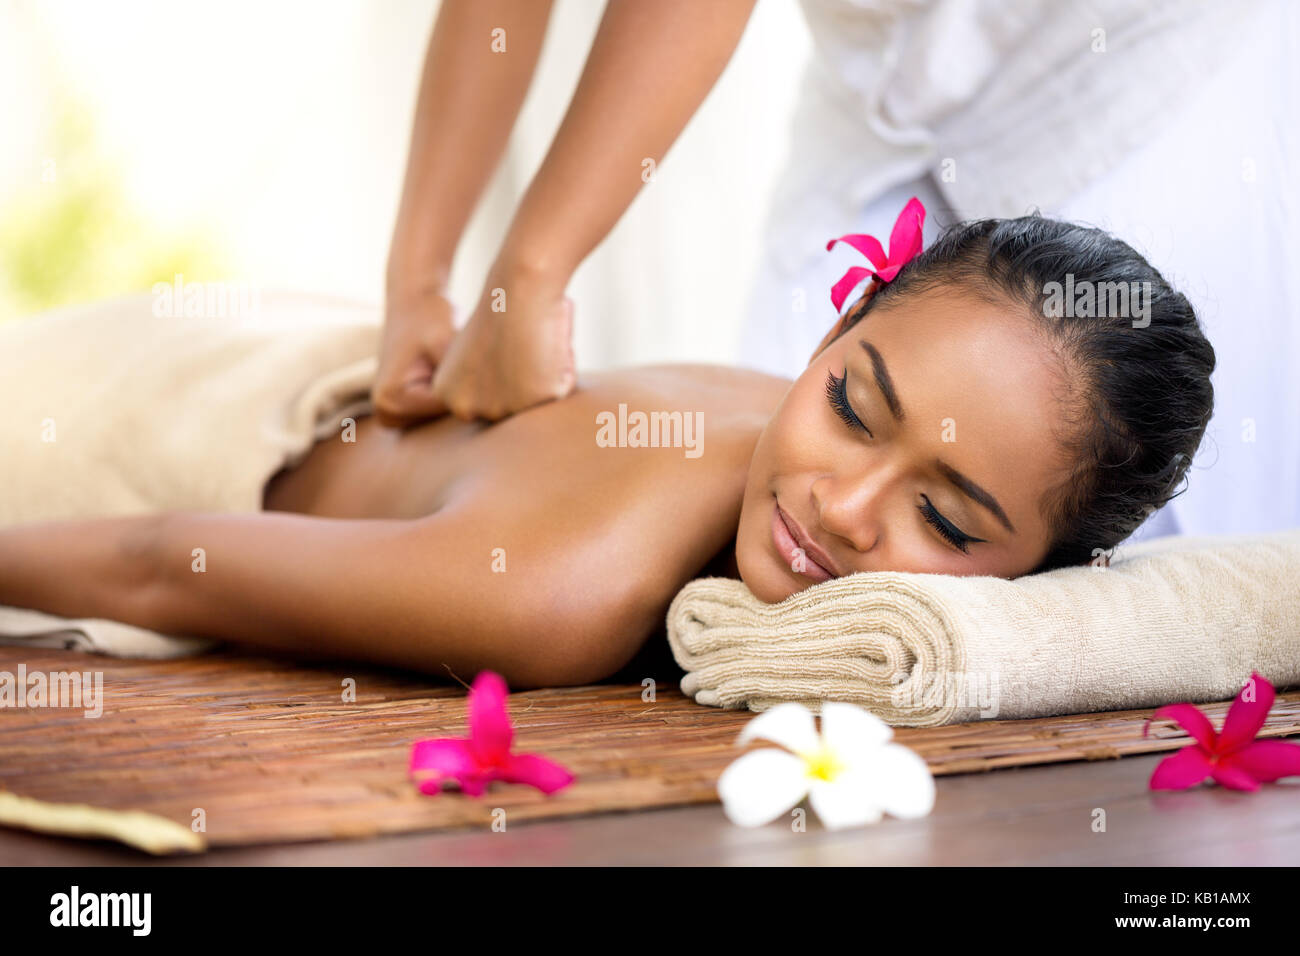 Balinese Massage High Resolution Stock Photography and Images - Alamy